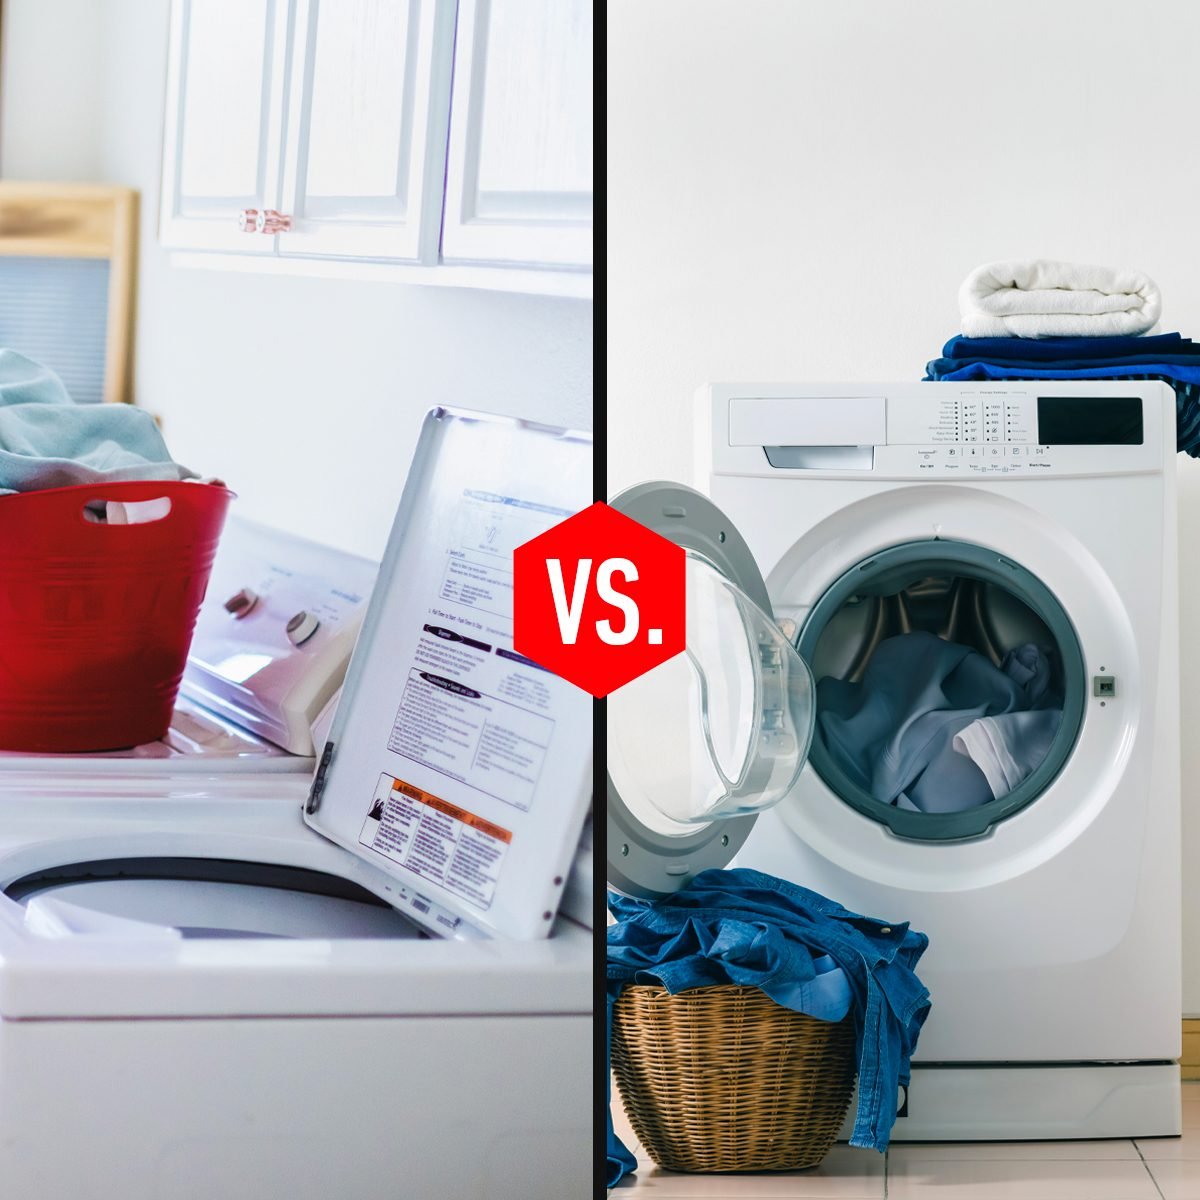 Are Front Loading Washing Machines Better Than Top Loaders?